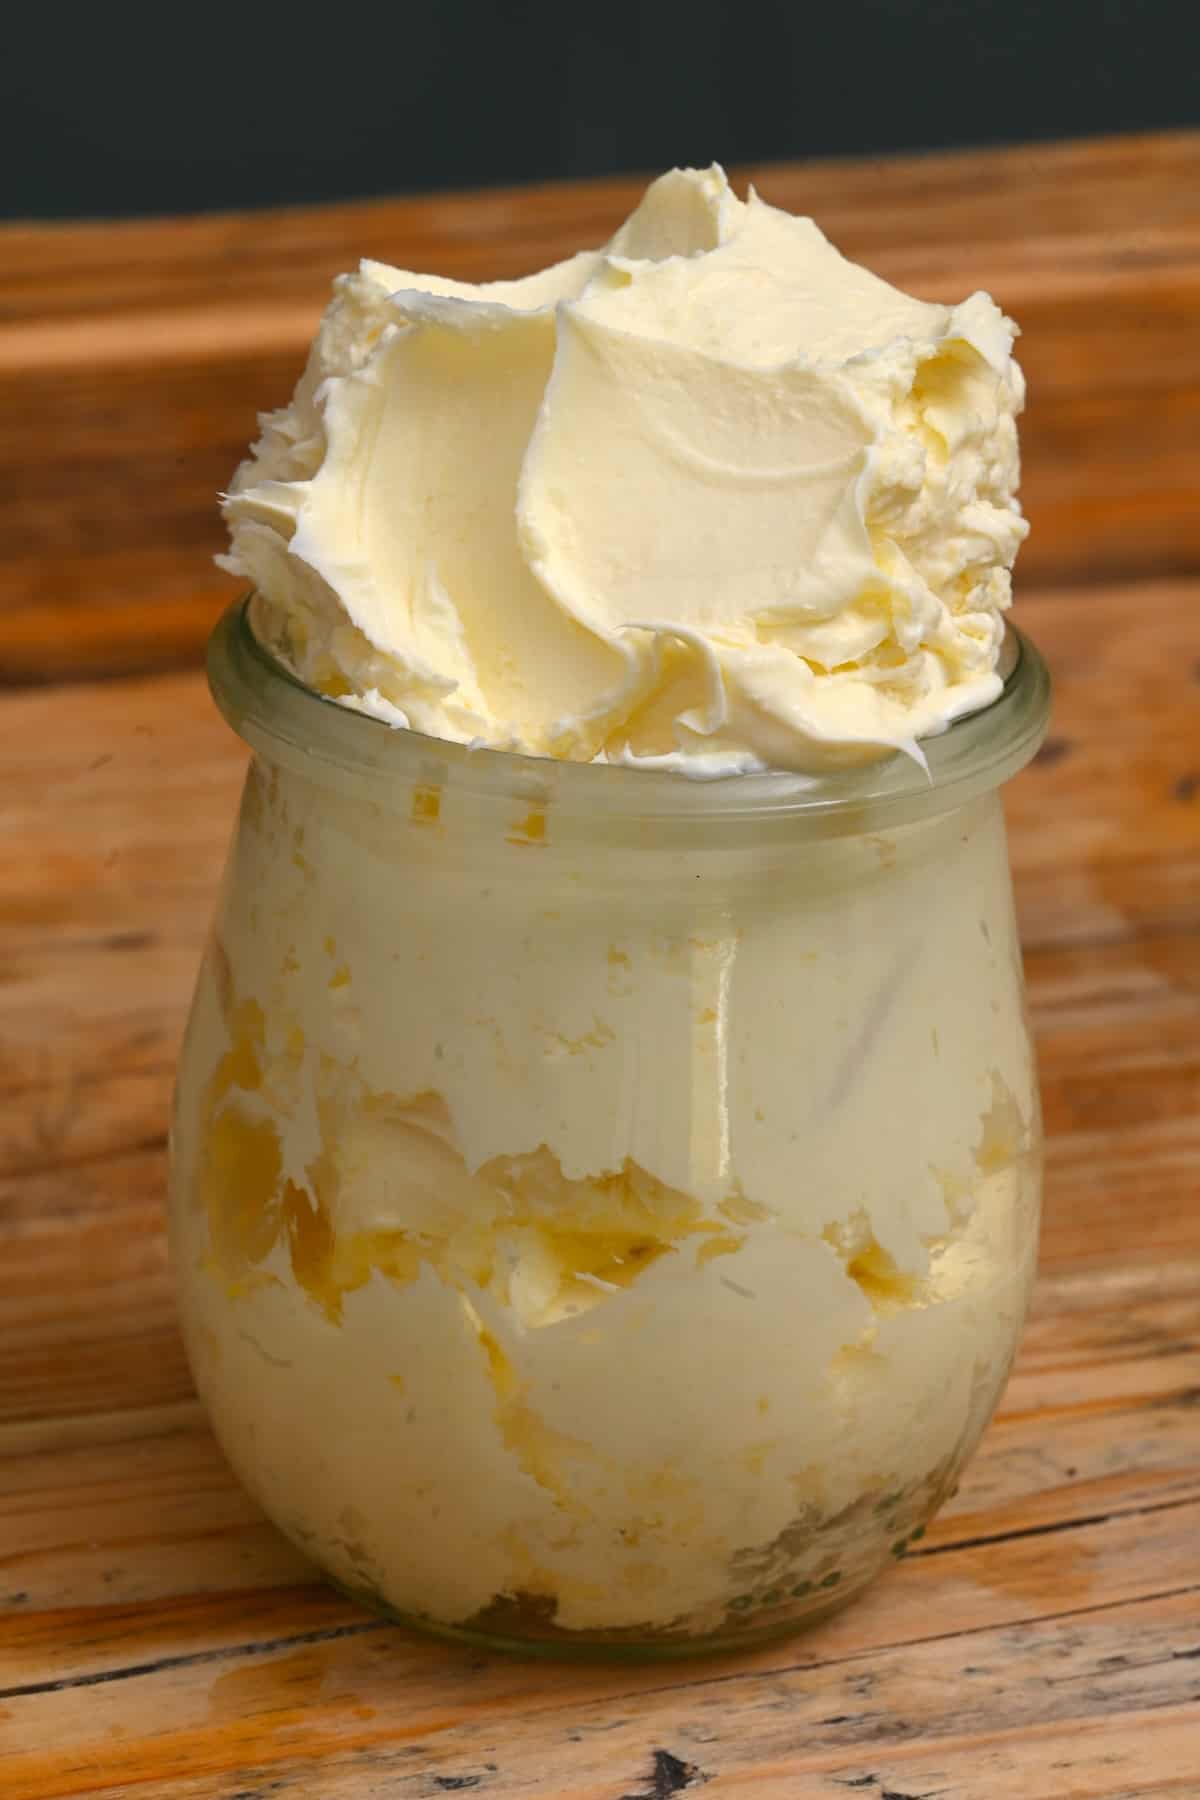 A little jar with homemade clotted cream